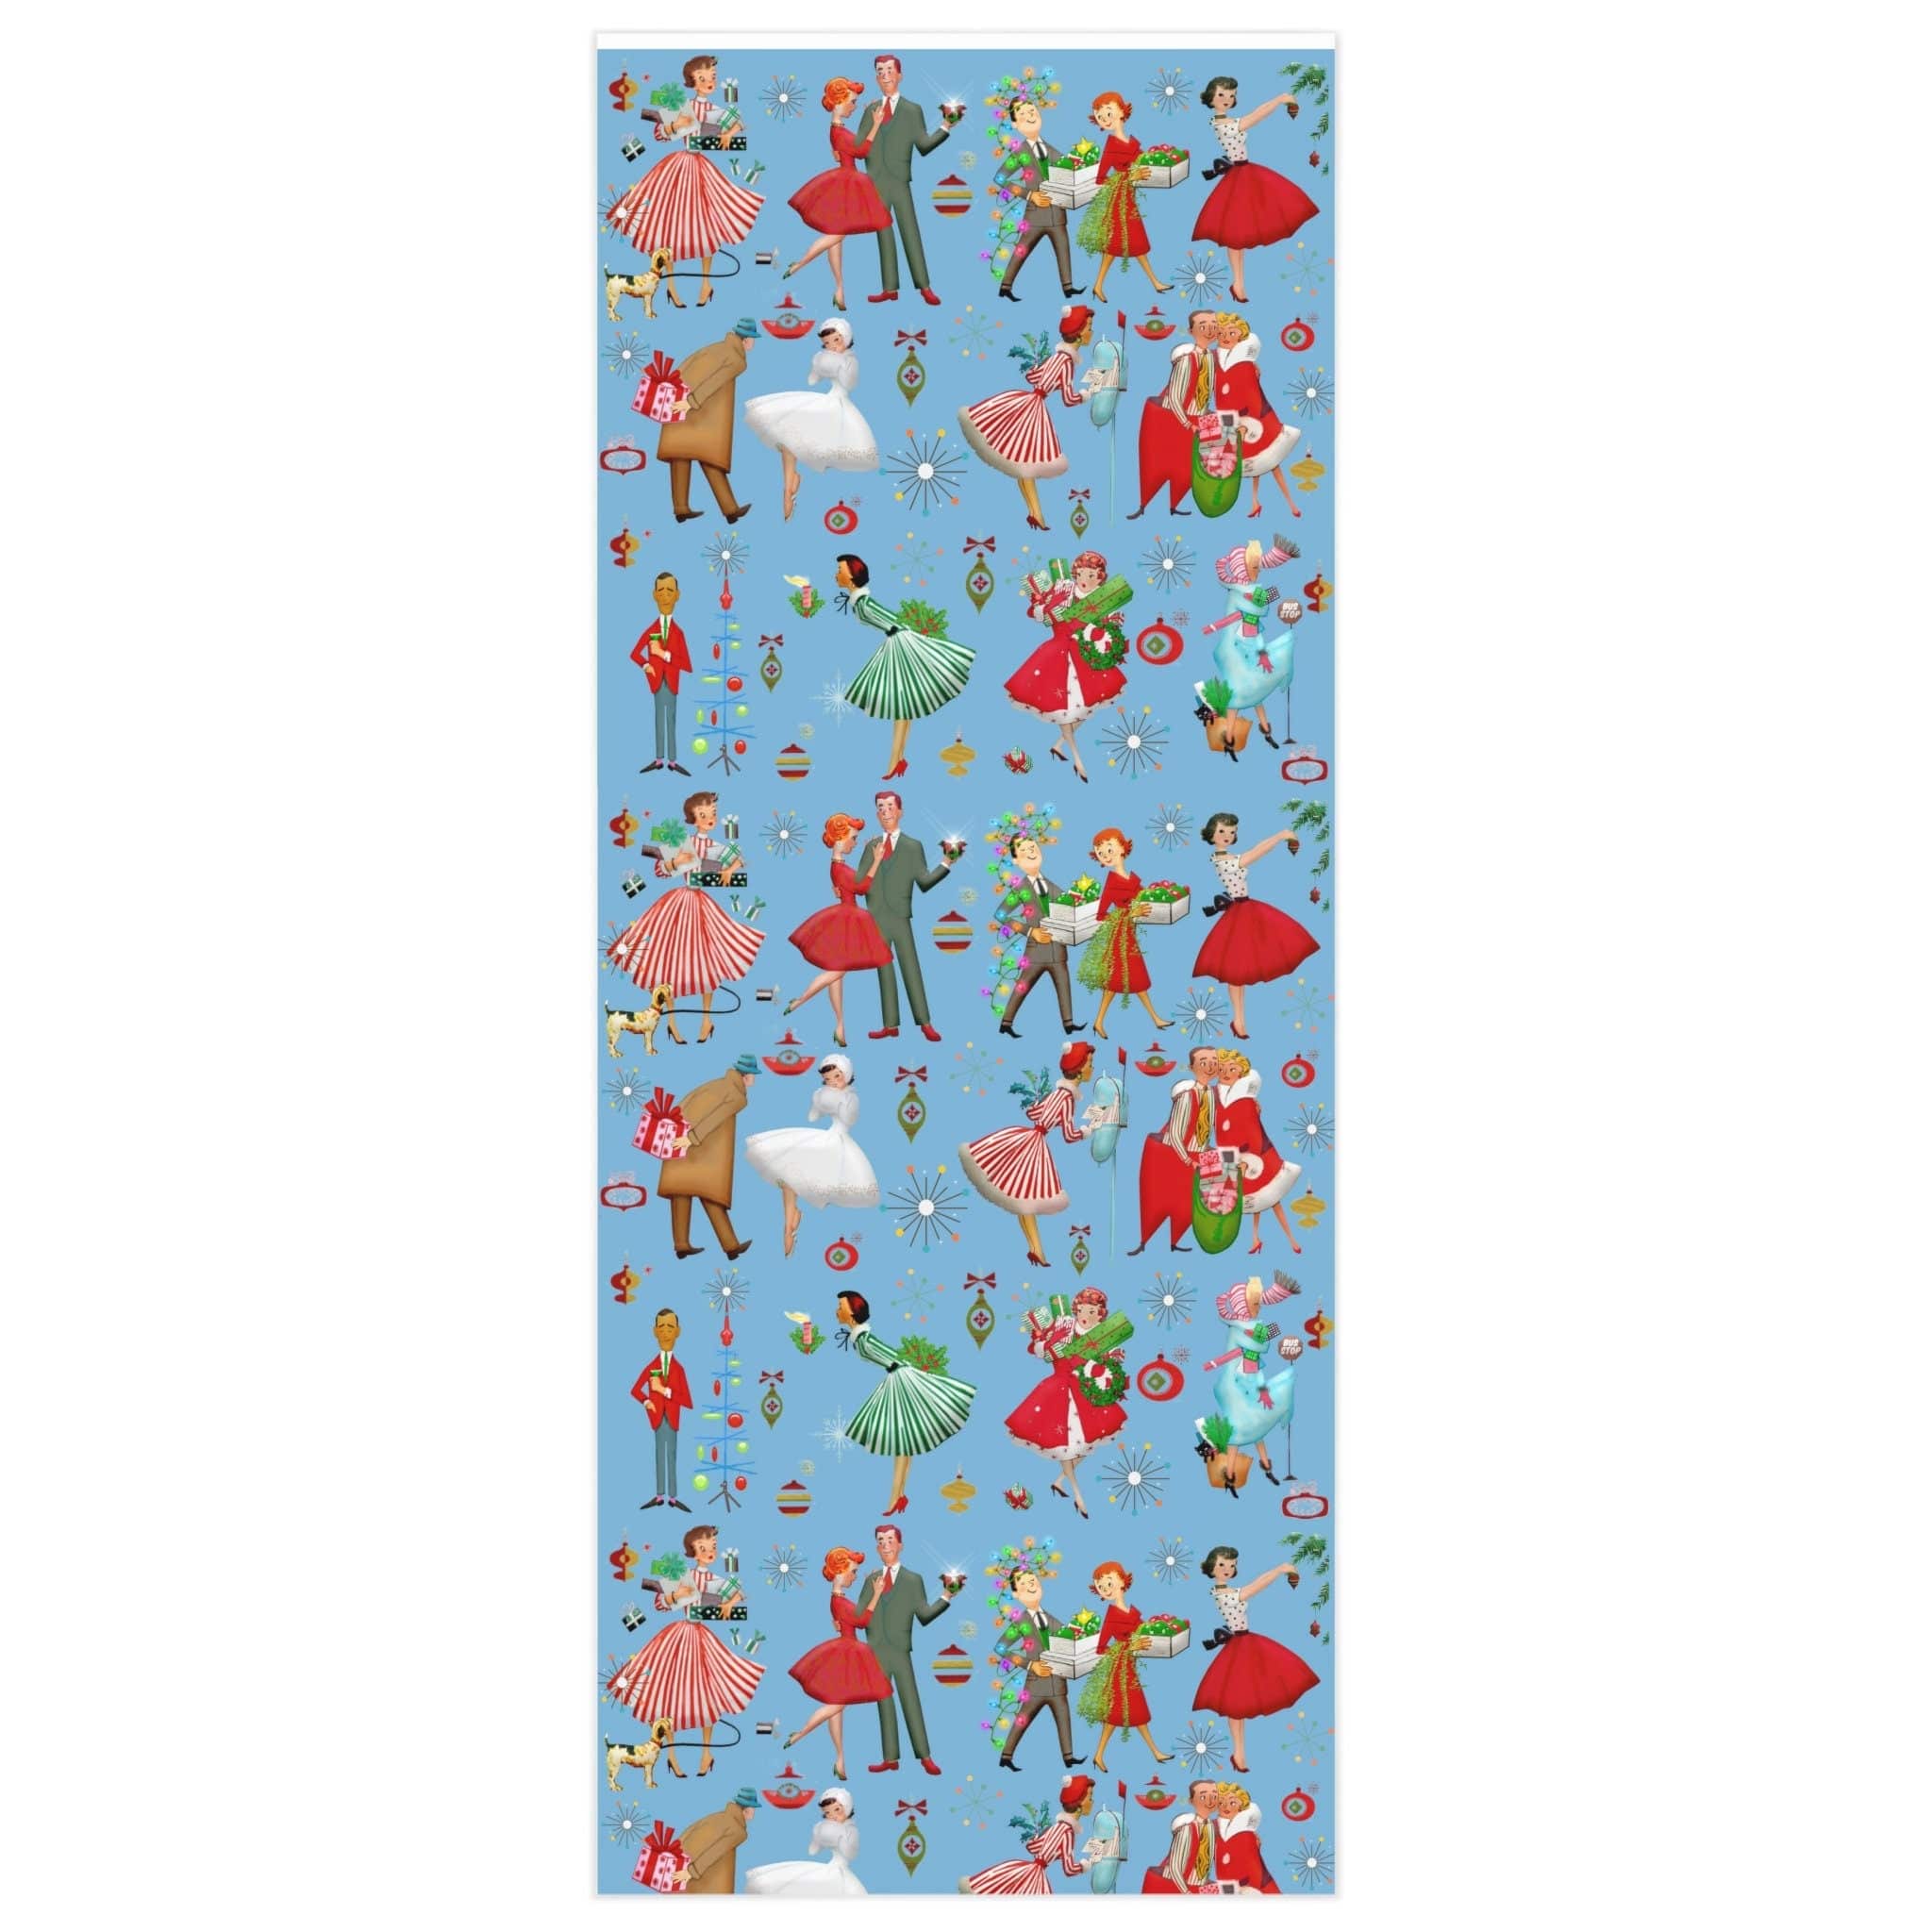 Kate McEnroe New York Retro Vintage 1950s Christmas Wrapping Paper, Mid Century Modern Retro Women, Ladies, Housewives Holiday Gift WrapWrapping Paper45714947009974950667